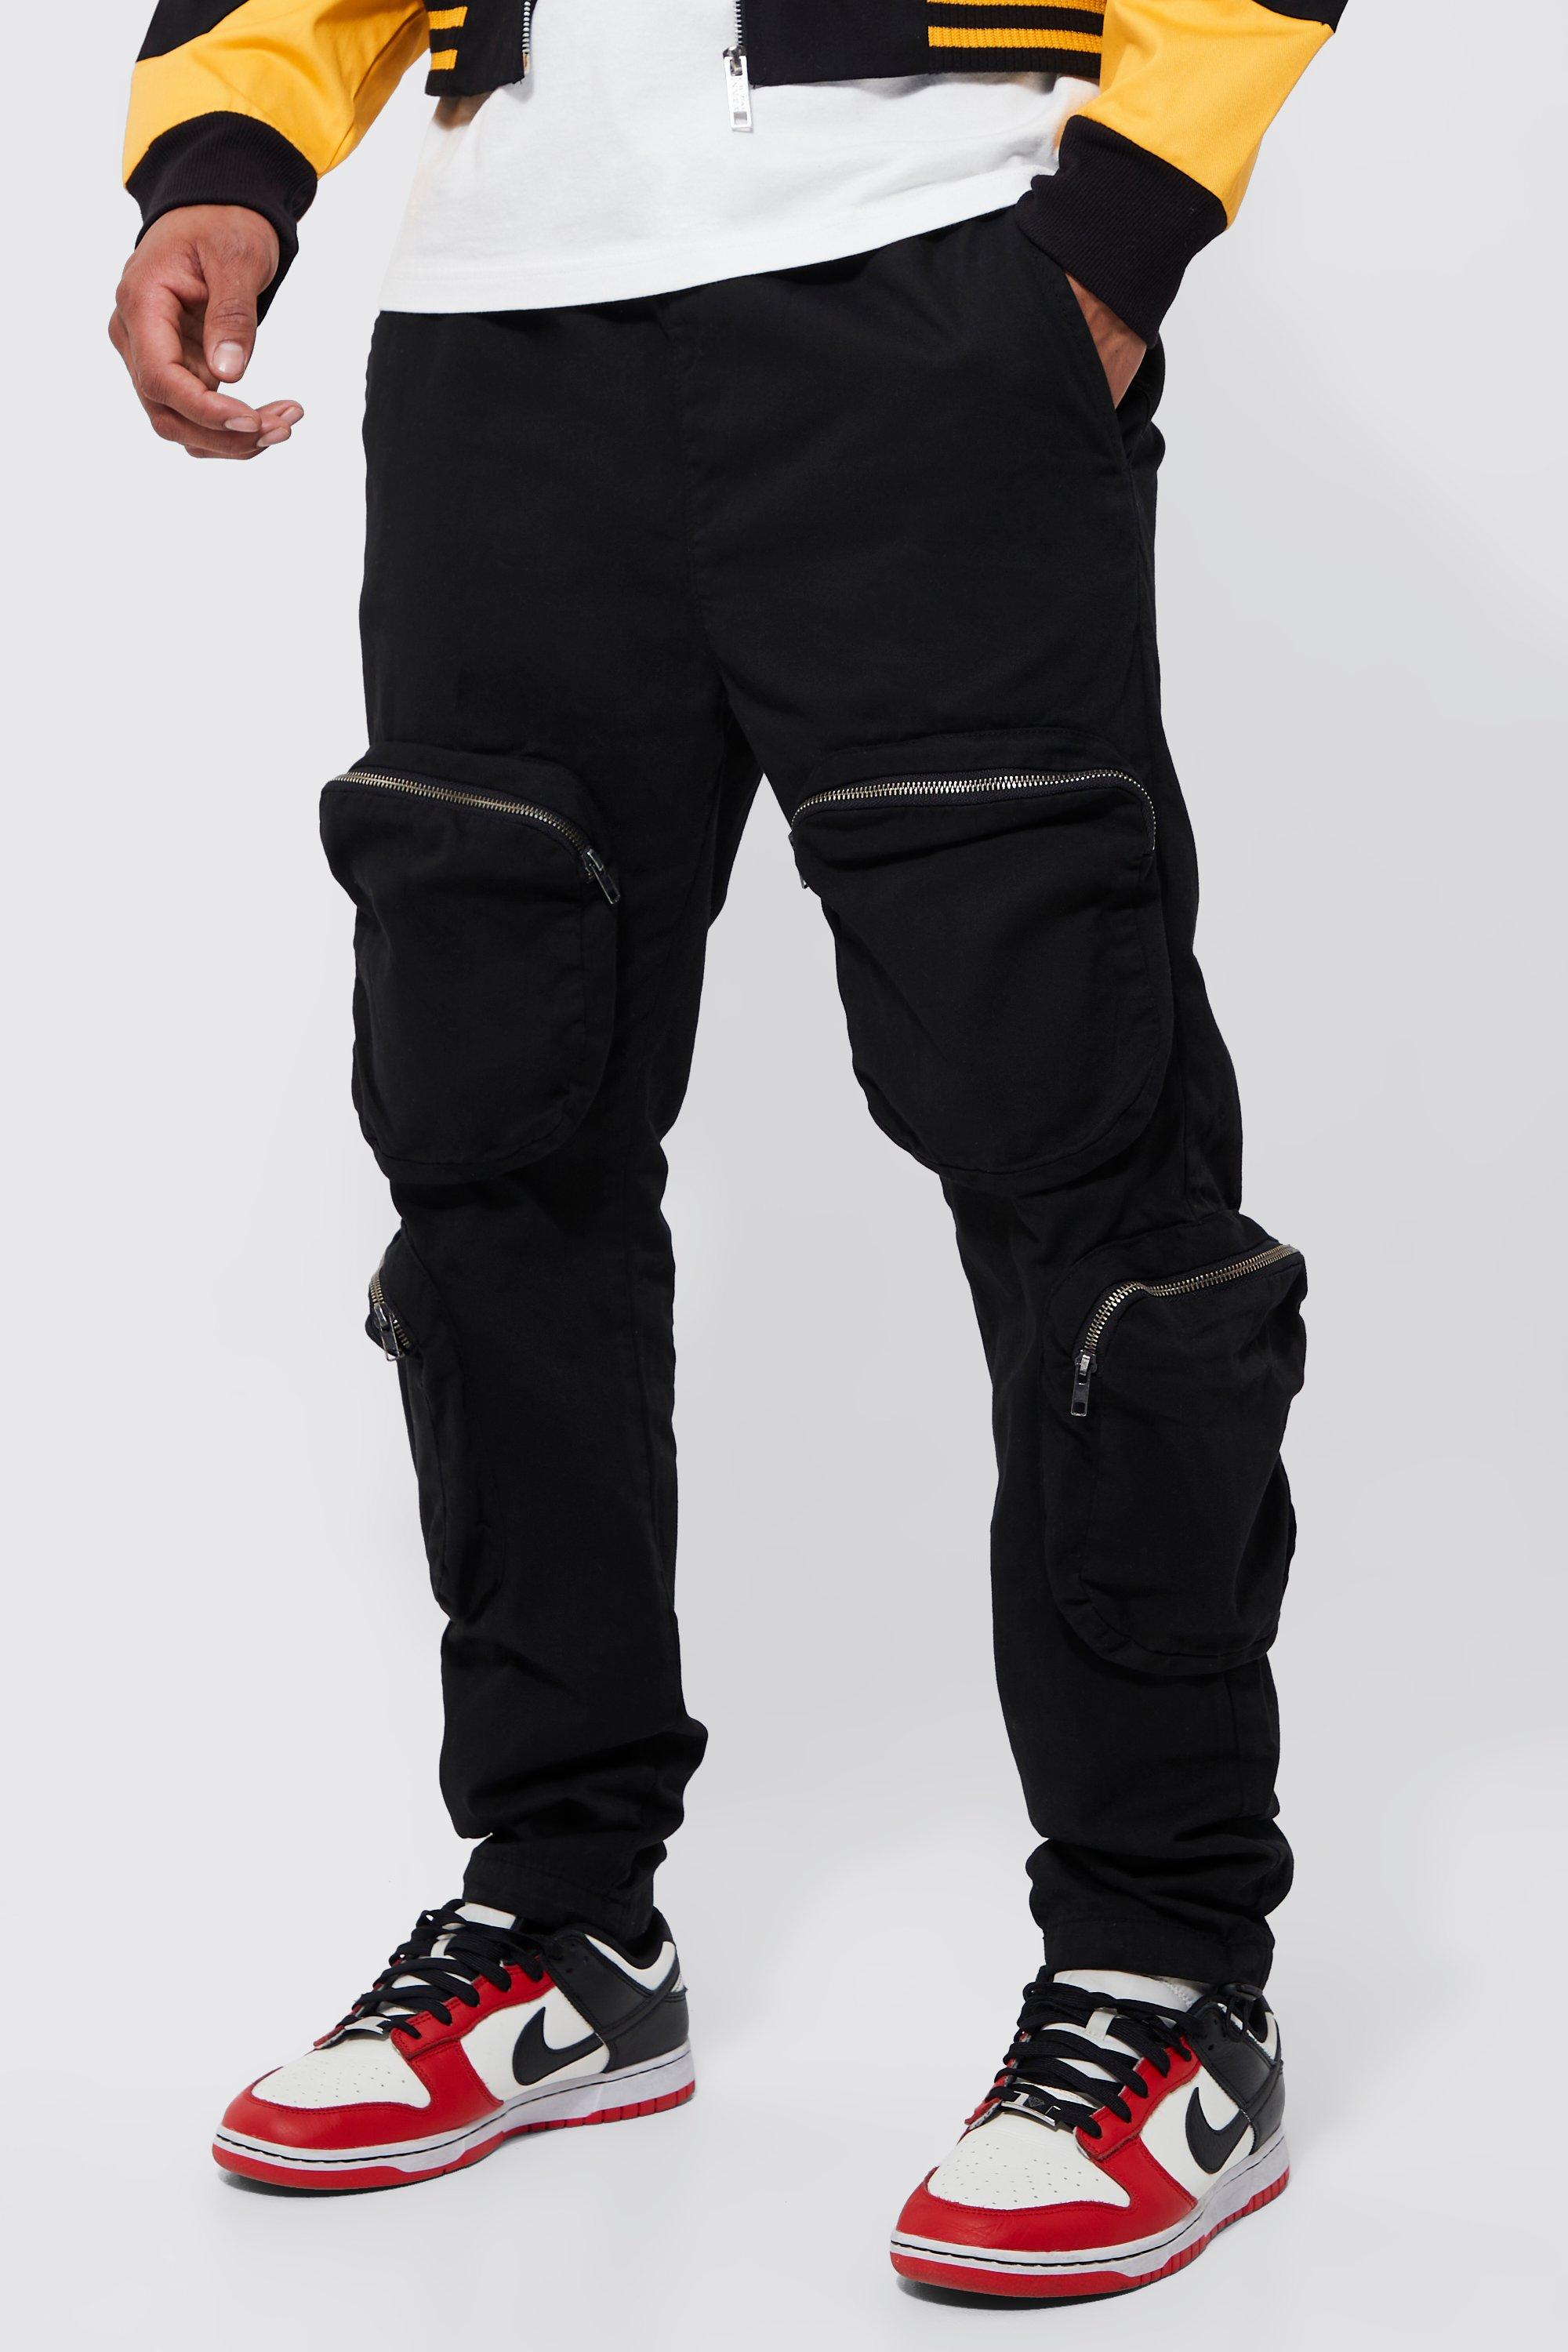 Mens Fashion Pants With Rubber Sole, Elastic Bottom, Side Zipper, And Beam  Foot Design Wholesale Casual Overalls And Irregular Black Tapered Trousers  From Rebecco, $19.18